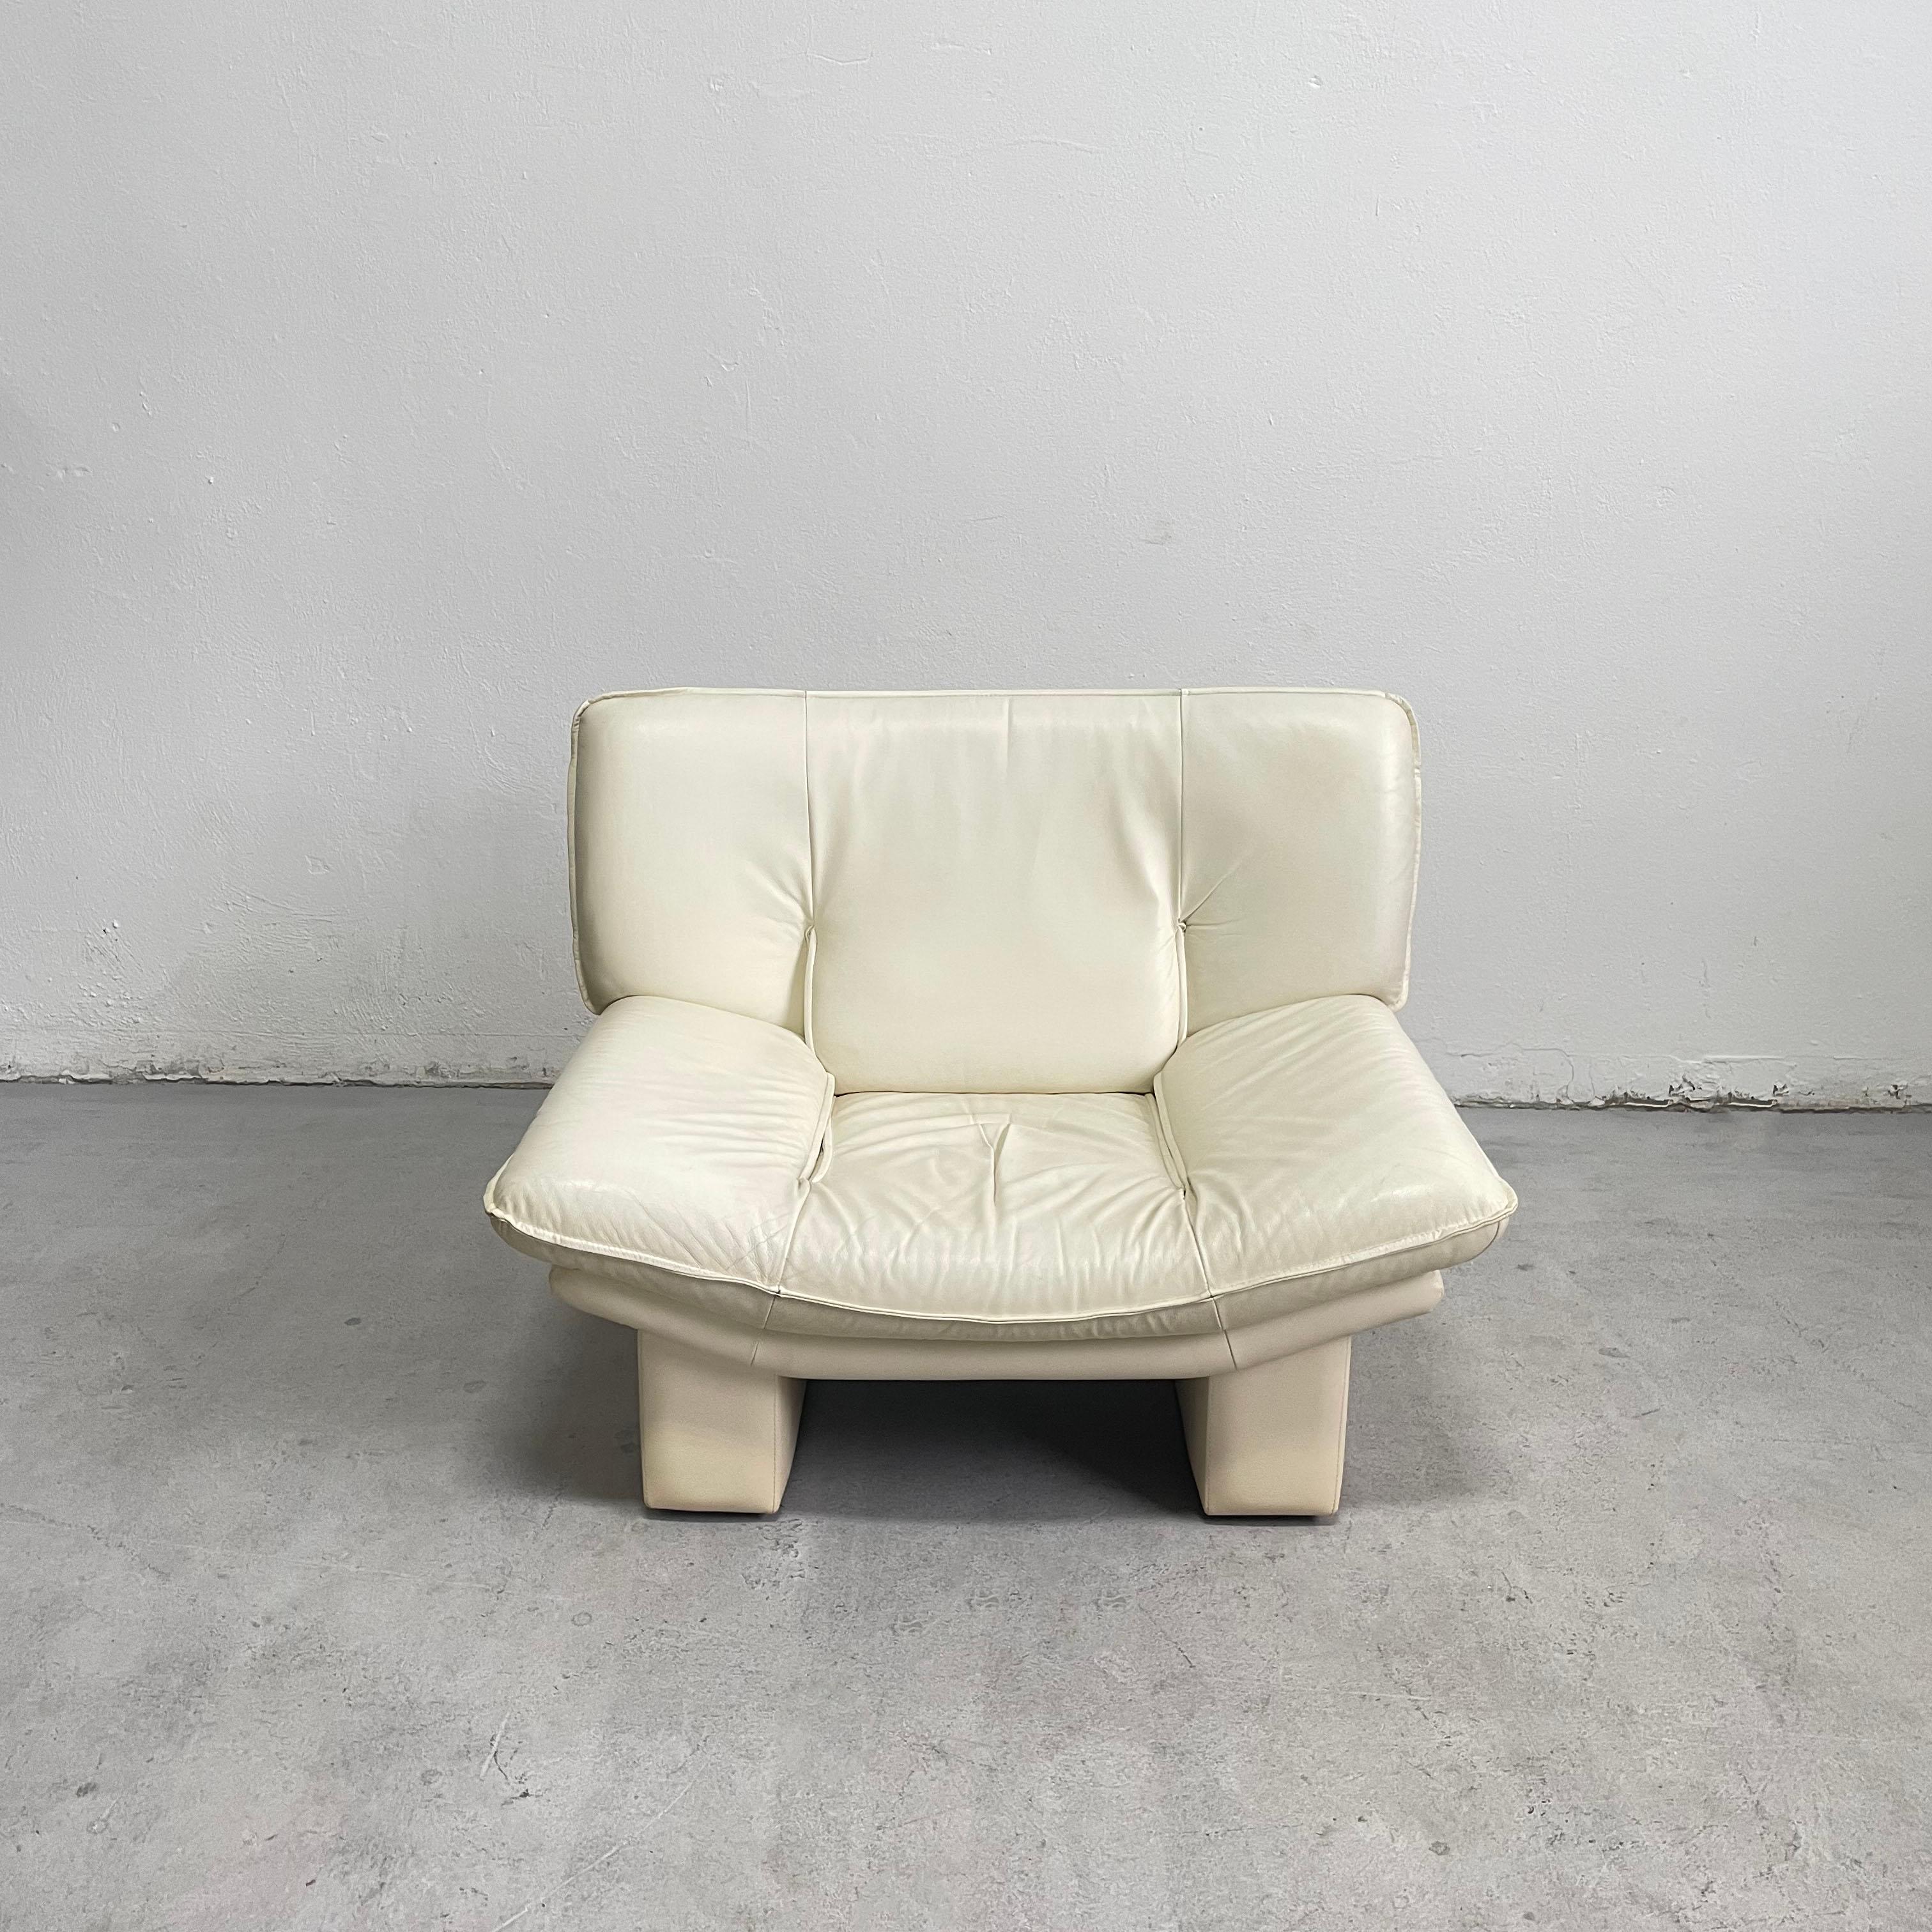 Italian armchair in beautiful ivory white color from the 1980s

This chair features wooden frame and very soft leather/leatherette upholstery

The chair remains in a very good vintage condition, showing just minor traces of cosmetic wear

It's very